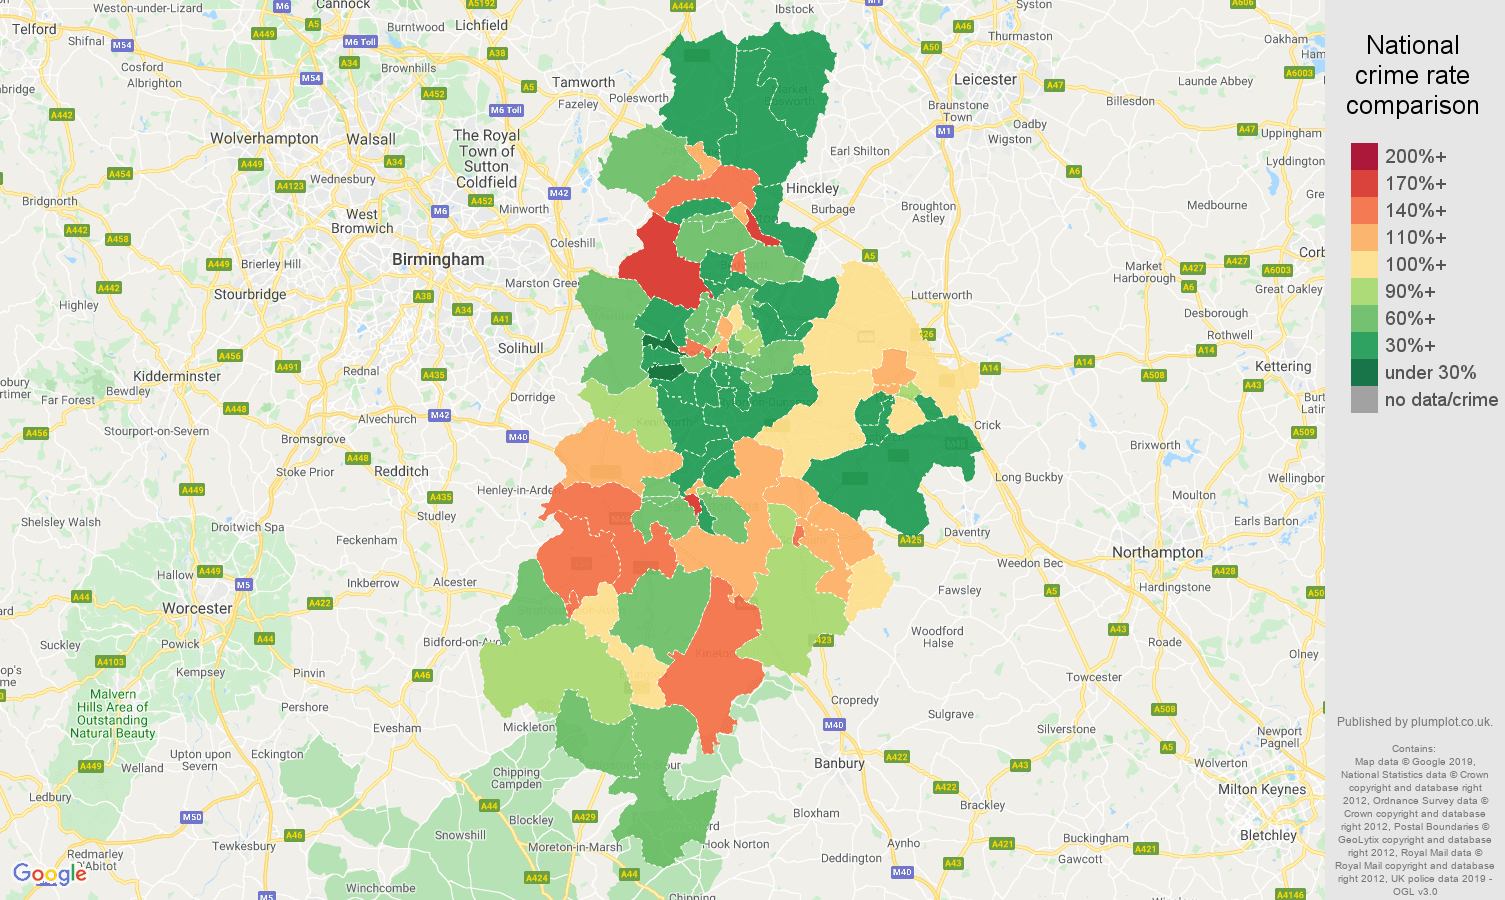 Coventry other theft crime rate comparison map